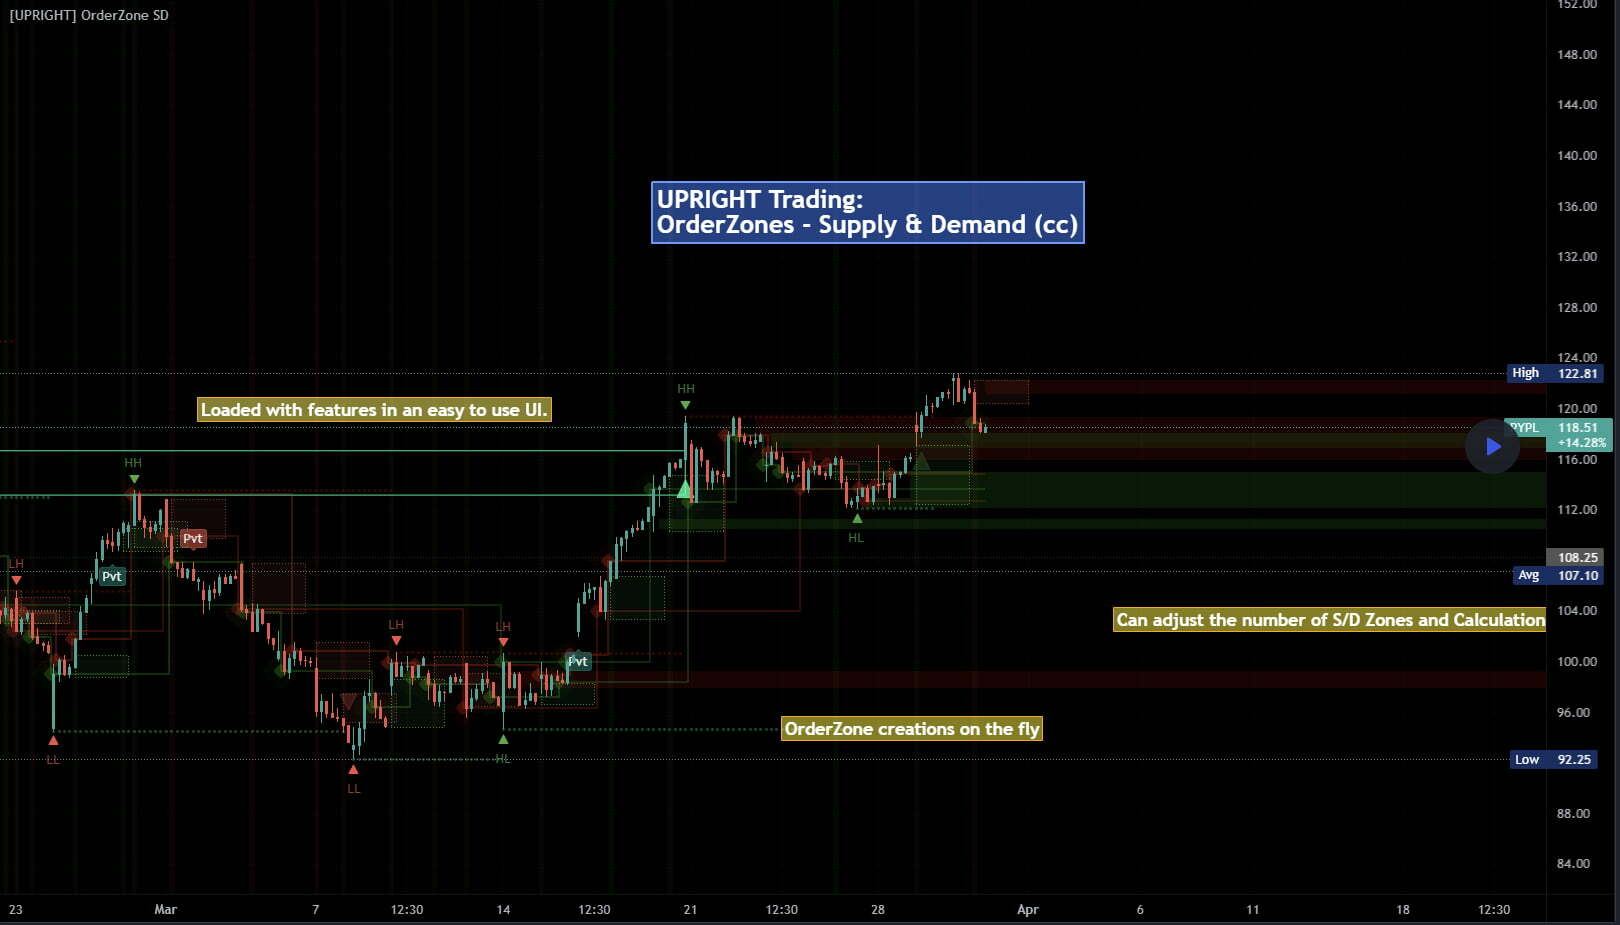 Best Indicators for Day Trading - UPRIGHT - Orderzones S/D